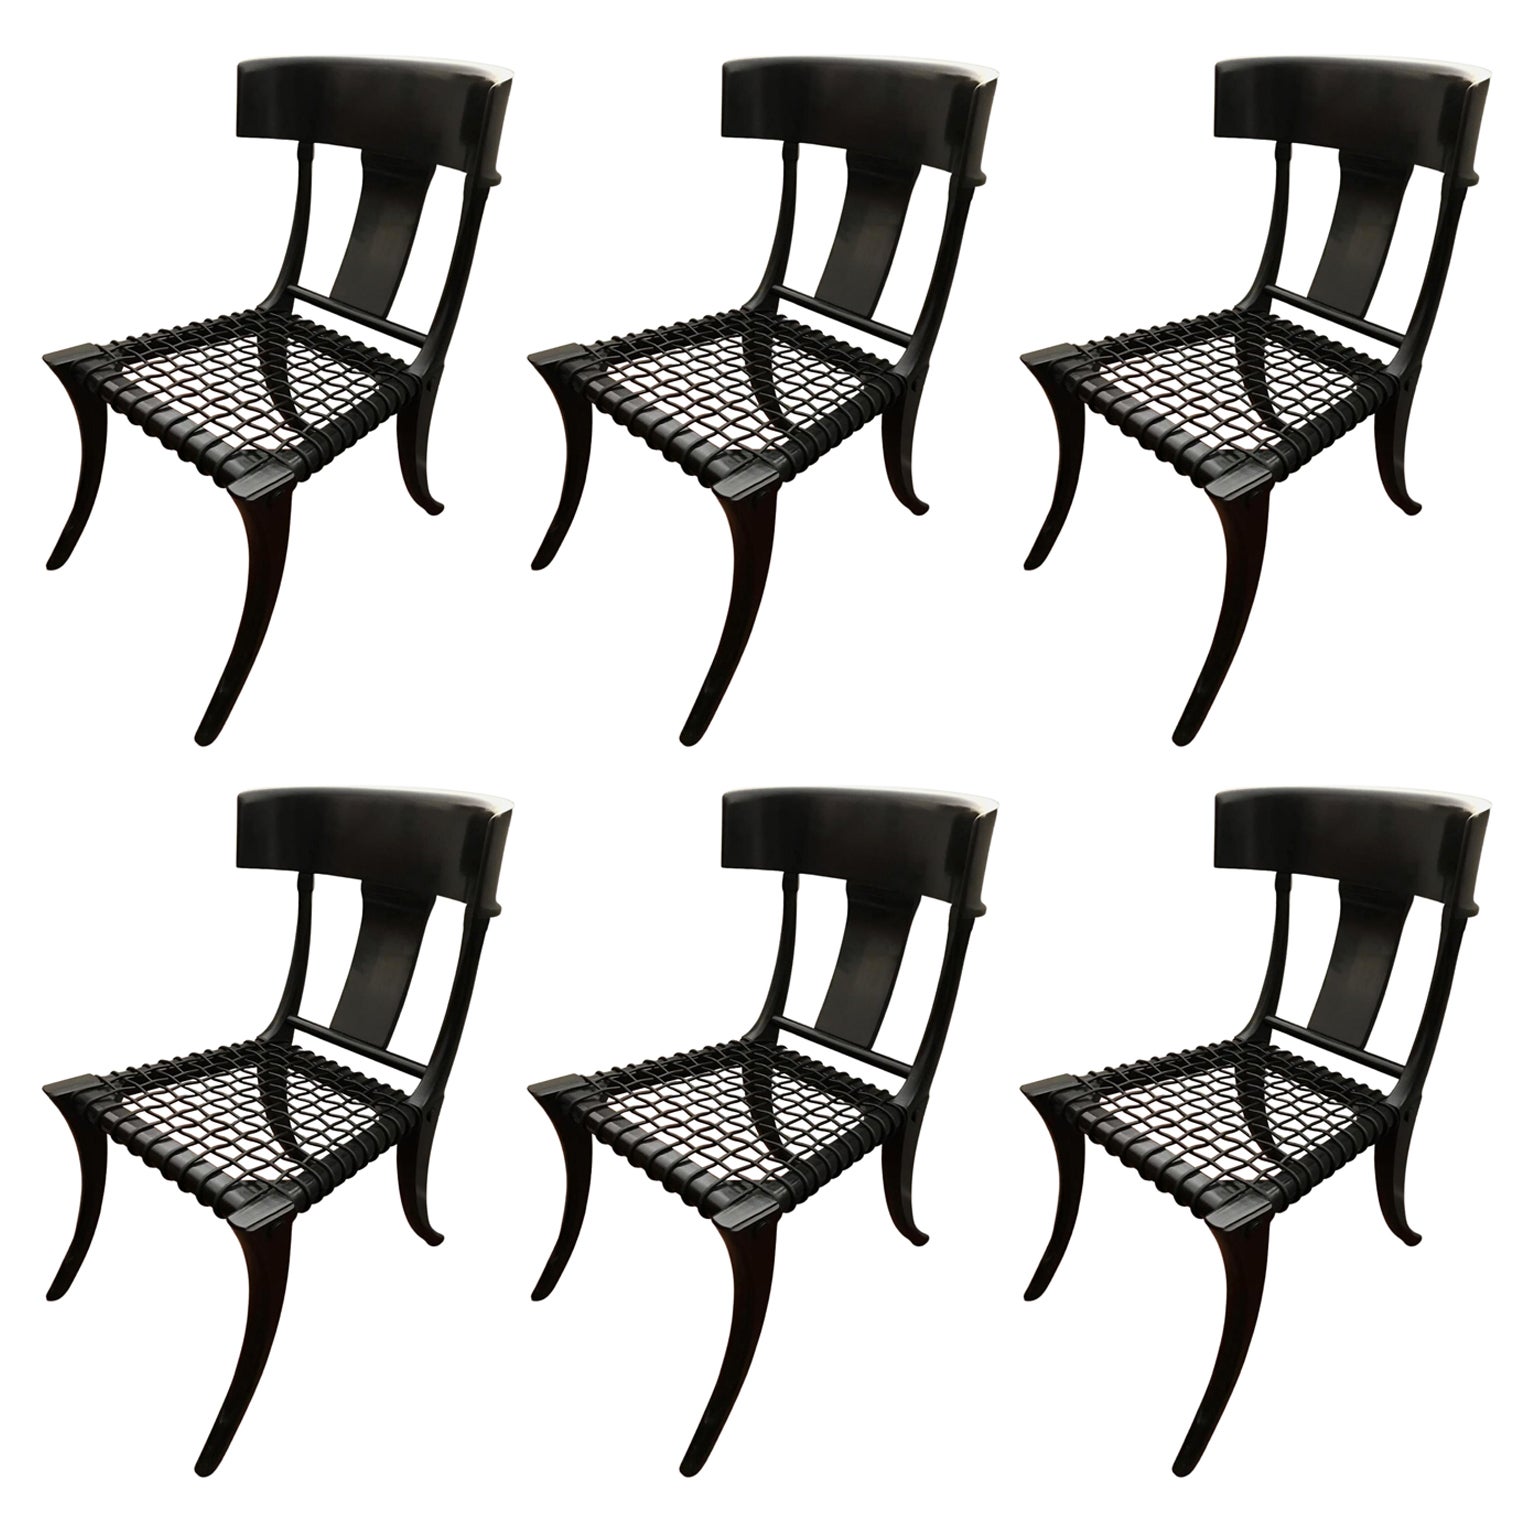 Black Woven Leather Seat Walnut Saber Legs Klismos Chairs Customizable Set of 6 For Sale